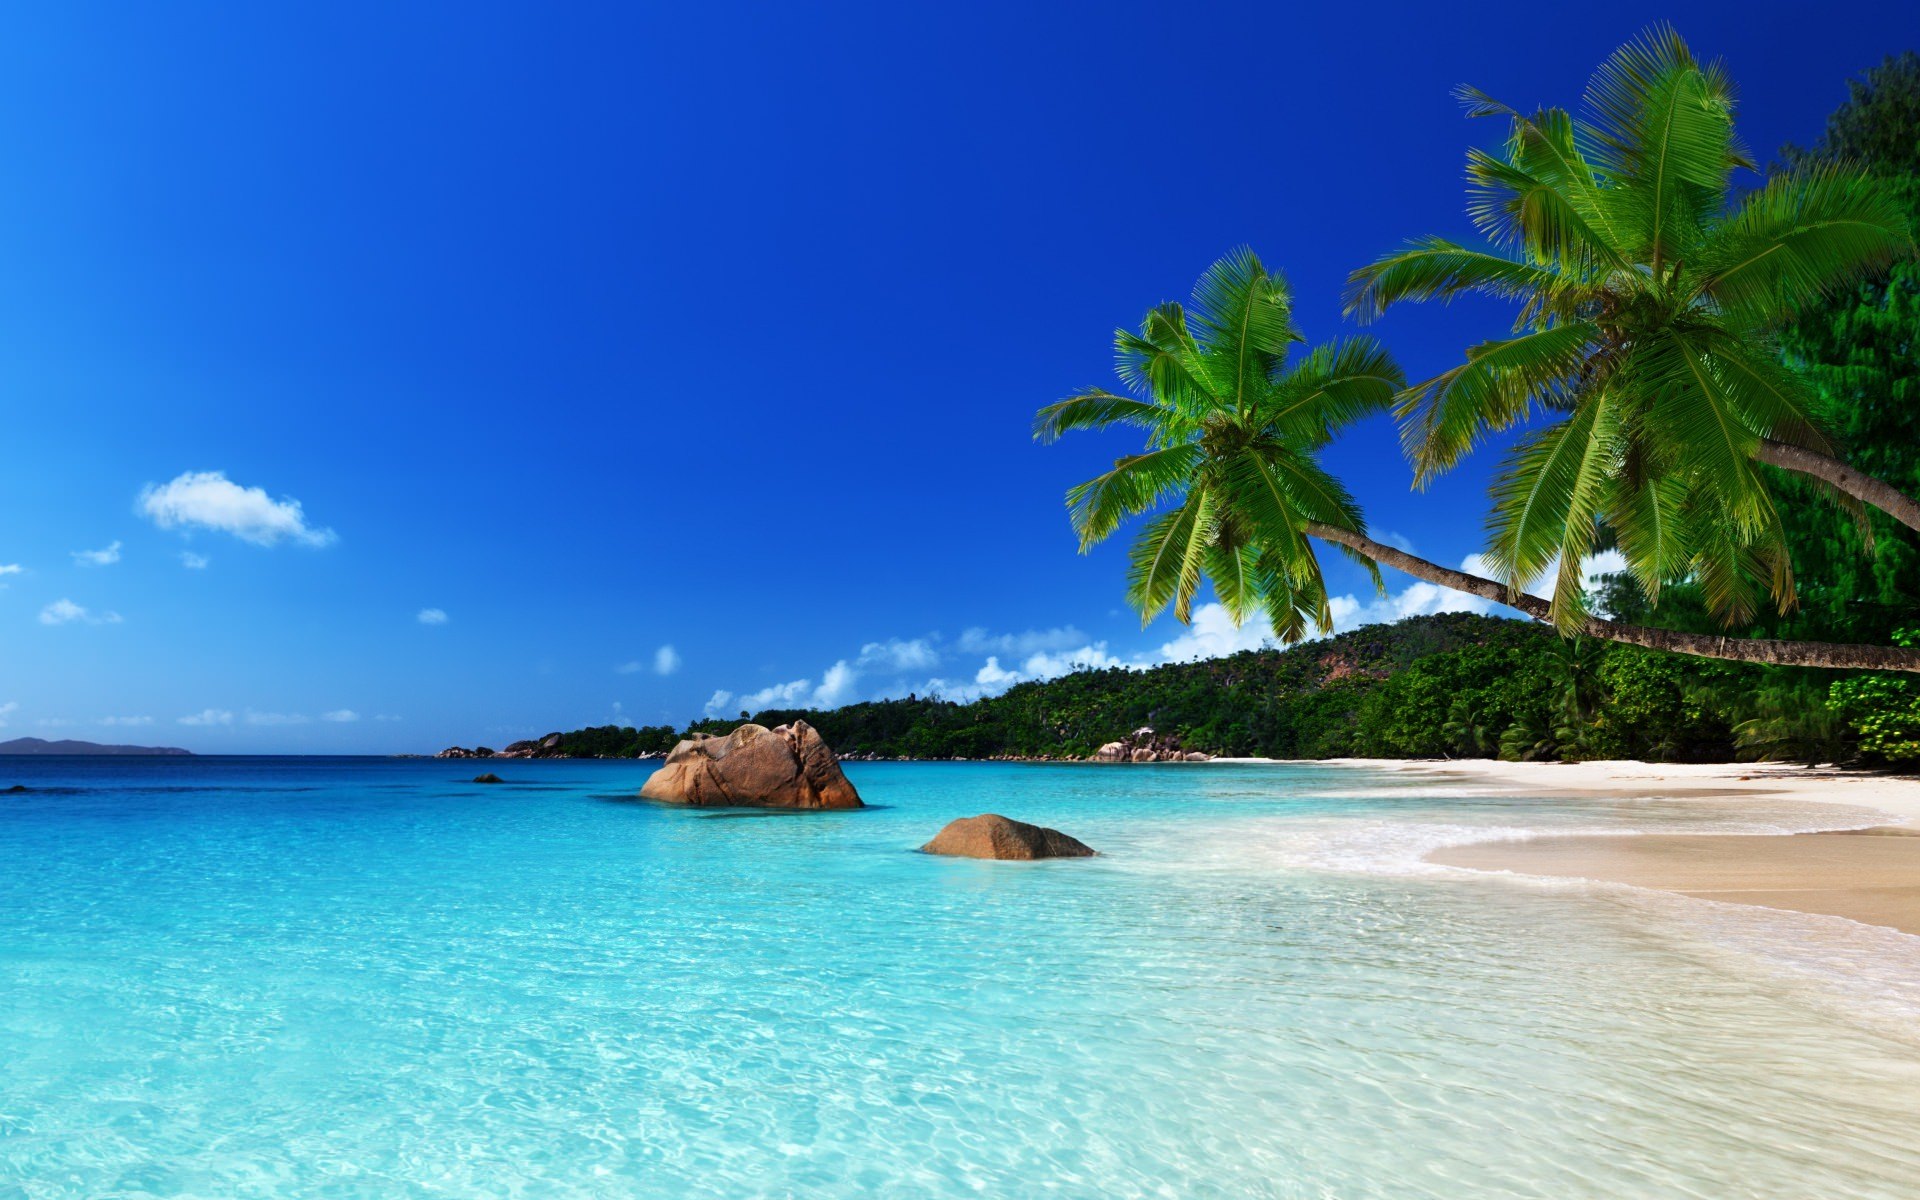 Free download 28 Tropical Beach Backgrounds Wallpapers Images